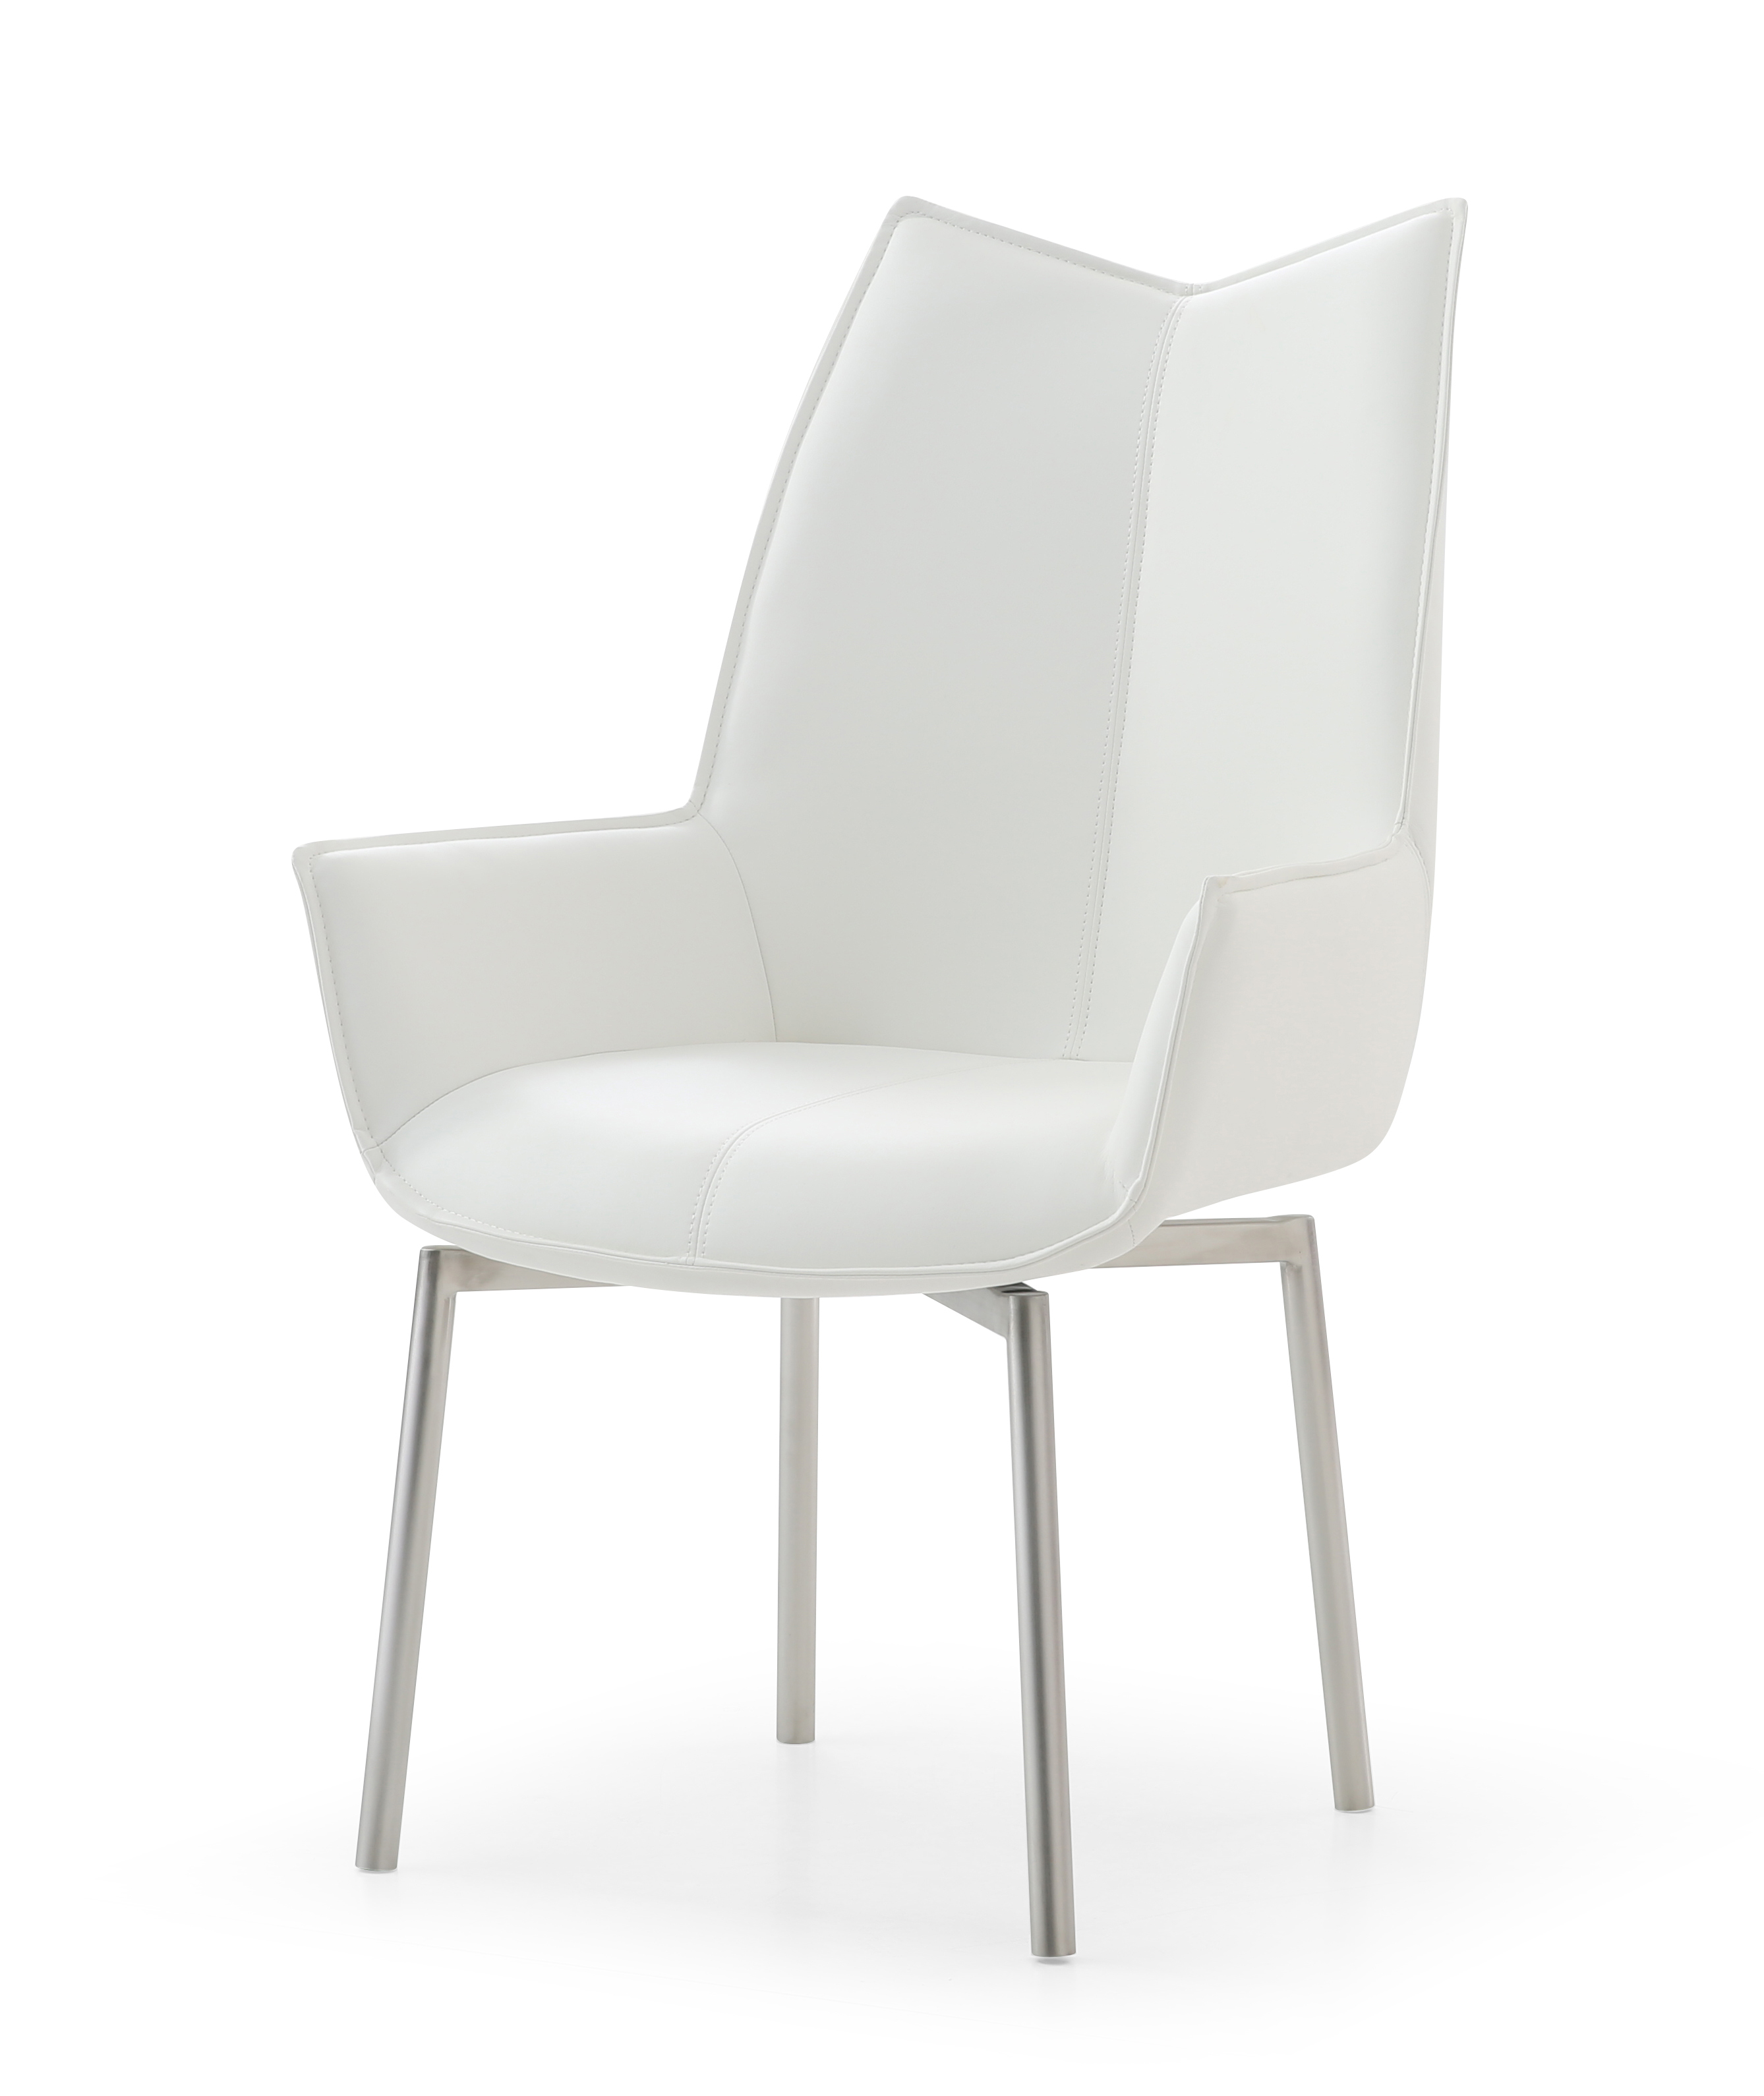 Dining Room Furniture Modern Dining Room Sets 1218 swivel dining chair White